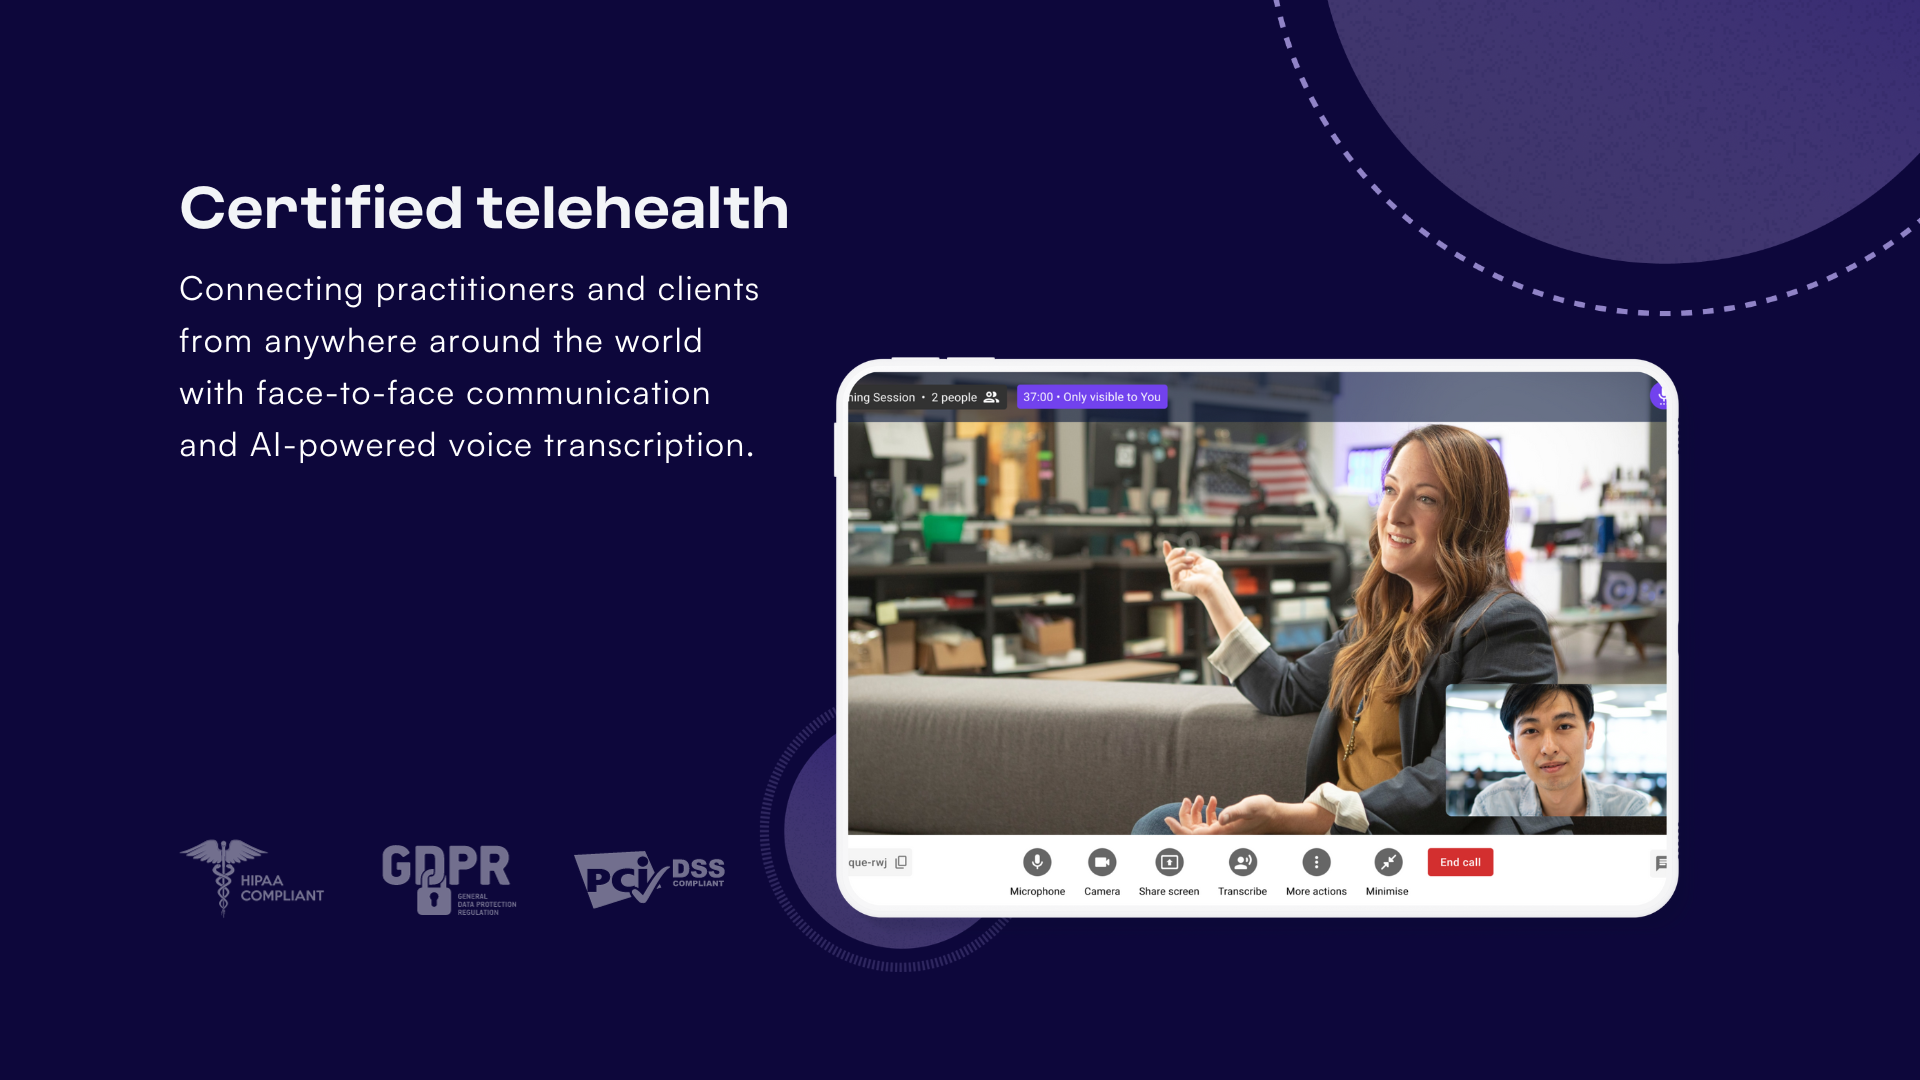 Your HIPAA-compliant Telehealth solution. Provide stress-free and secure video appointments with our fully integrated desktop and mobile app software.